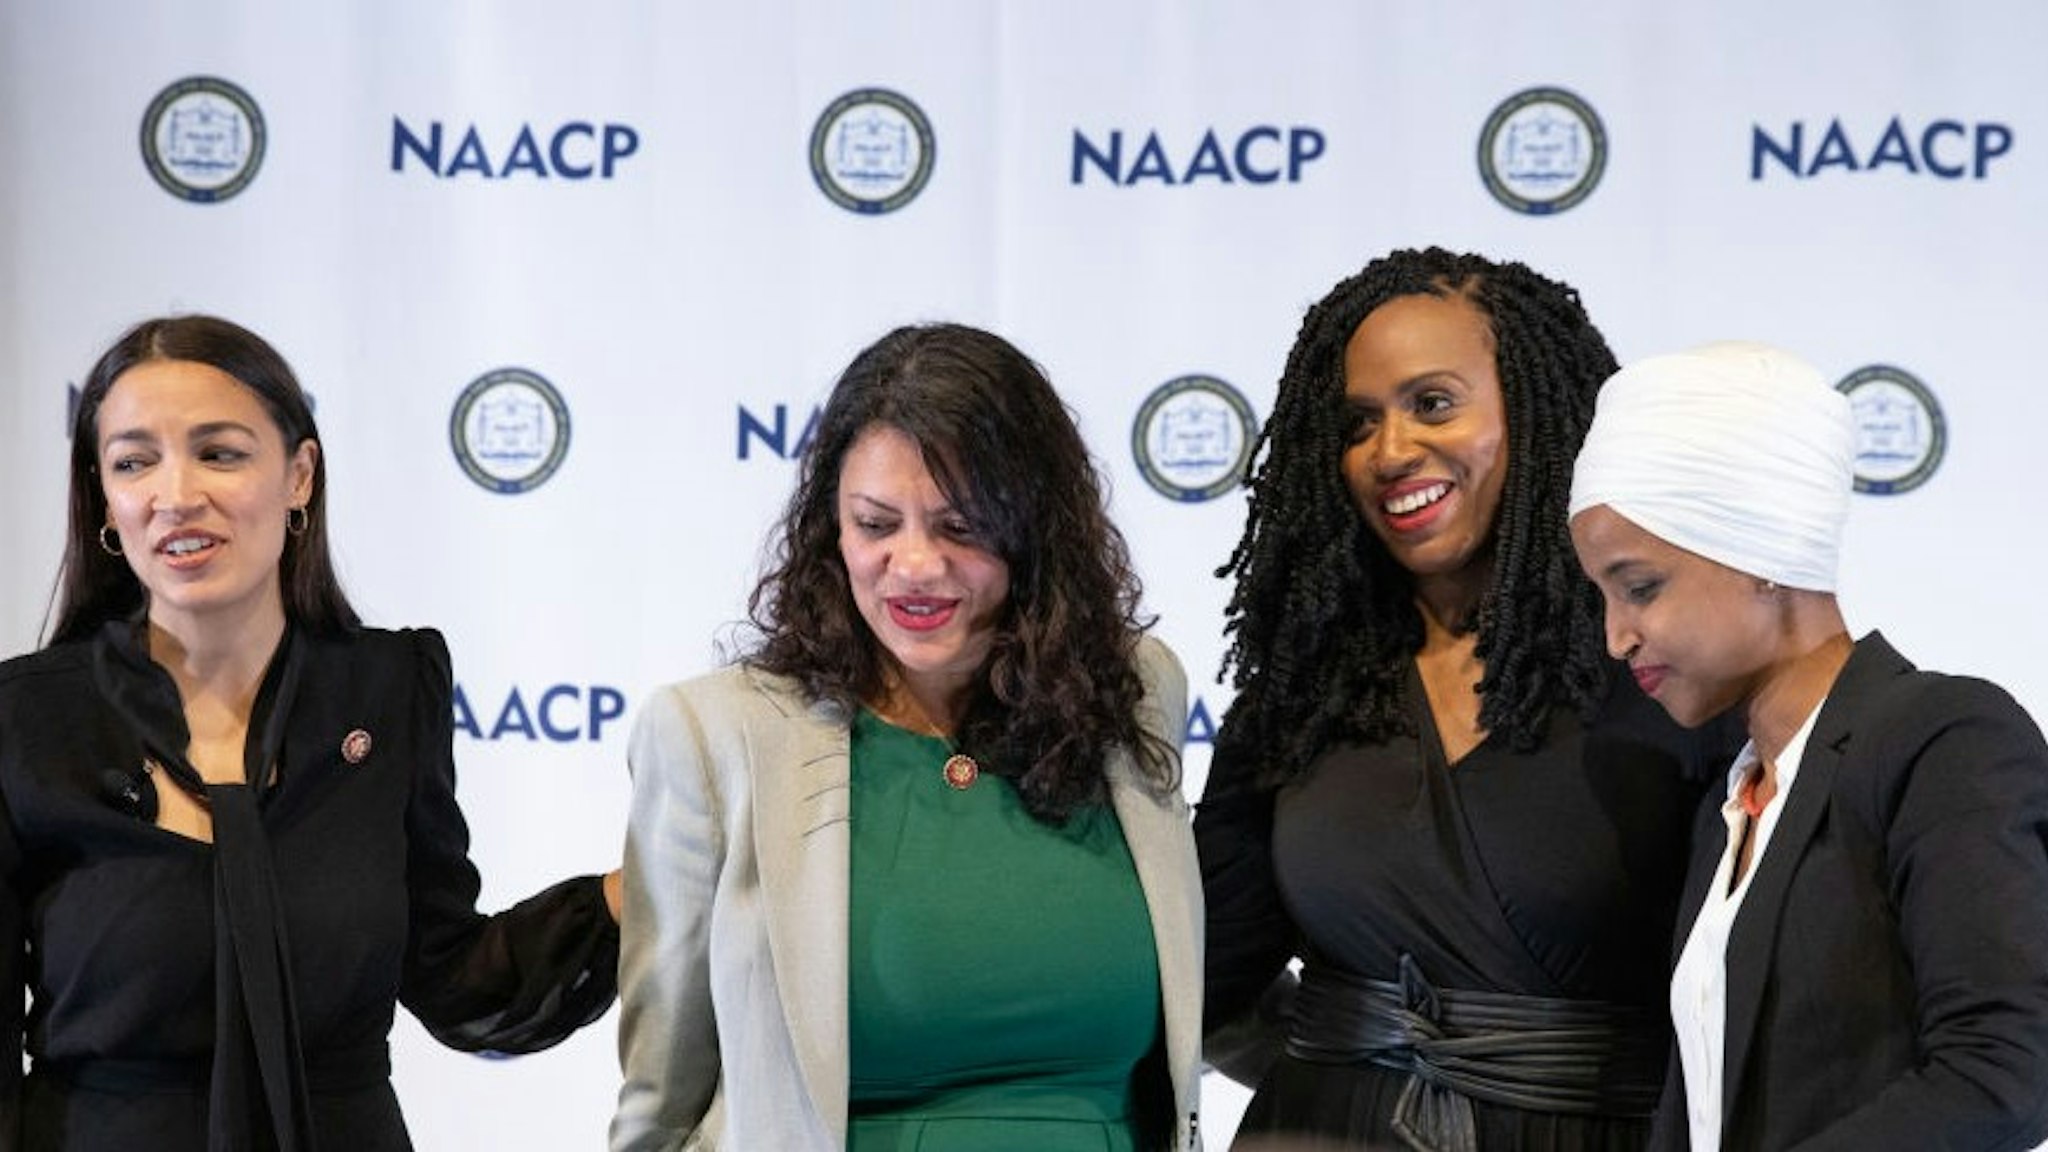 L-R: U.S. House of Representatives: Alexandria Ocasio-Cortez, Rashida Tlaib, Ayanna Pressley, and Ilhan Omar, after the NAACP town hall during the Congressional Black Caucus Foundations (CBCF) 49th Annual Legislative Conference (ALC), addressing the 2020 census, voting rights, and the upcoming presidential election. The town hall took place at the Walter E. Washington Convention Center in Washington, D.C., on Wednesday, September 11, 2019.